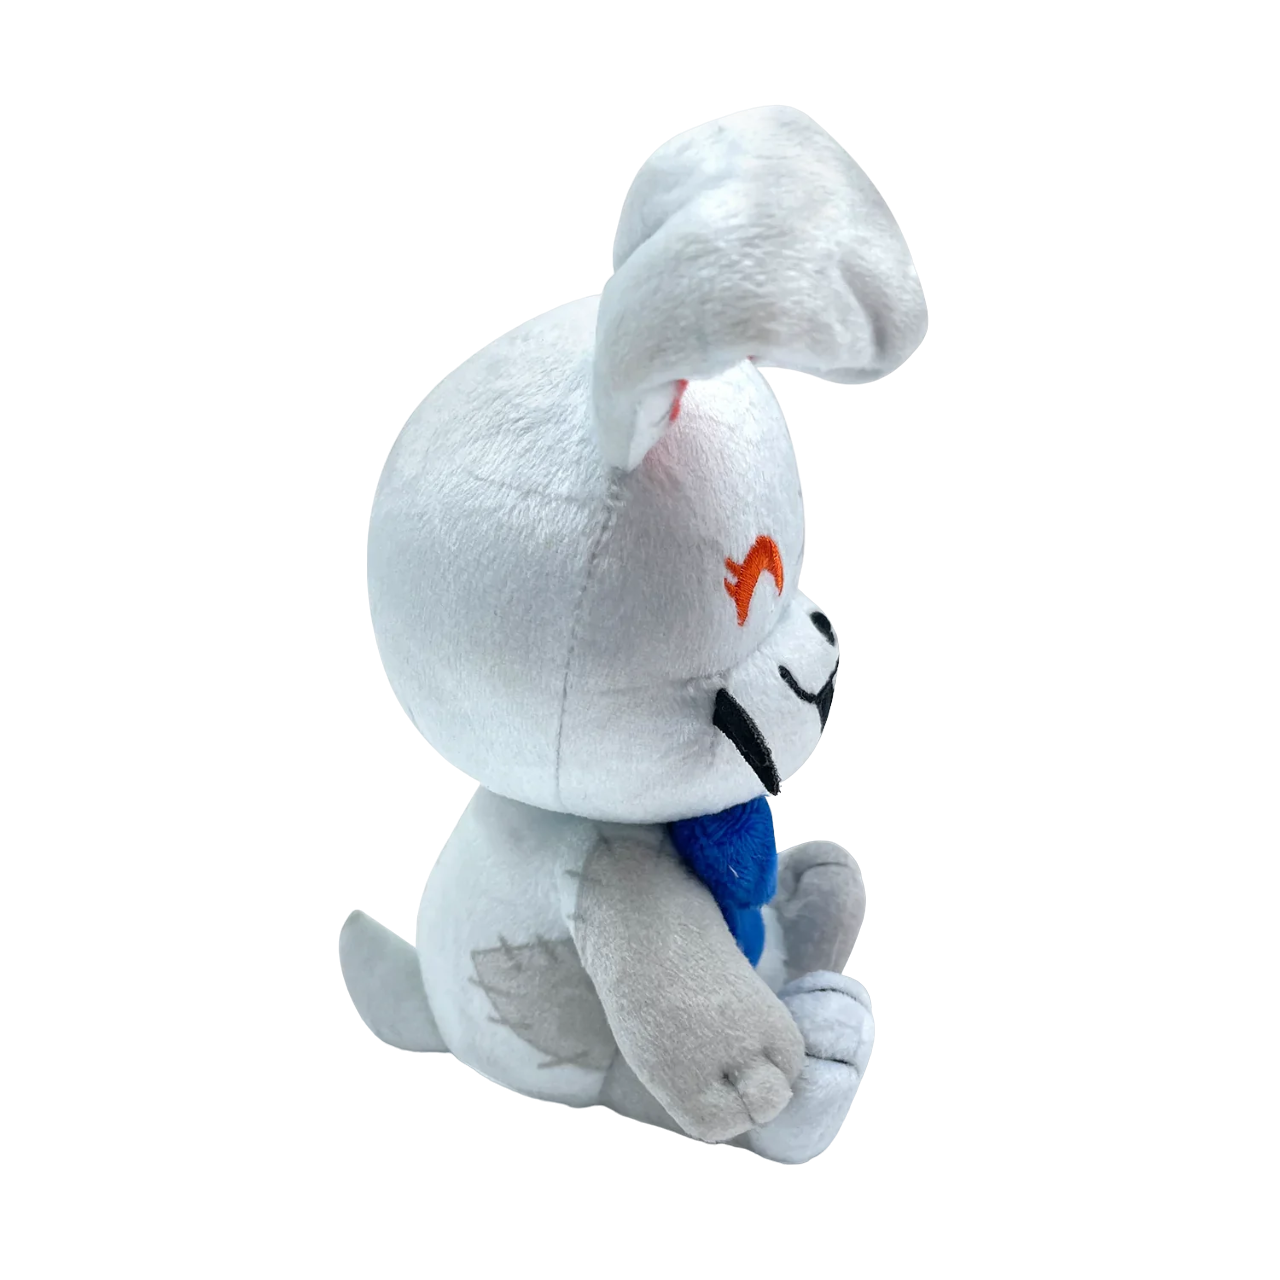 Five Nights At Freddys - Vanny Shoulder Rider Youtooz Plush (6IN)